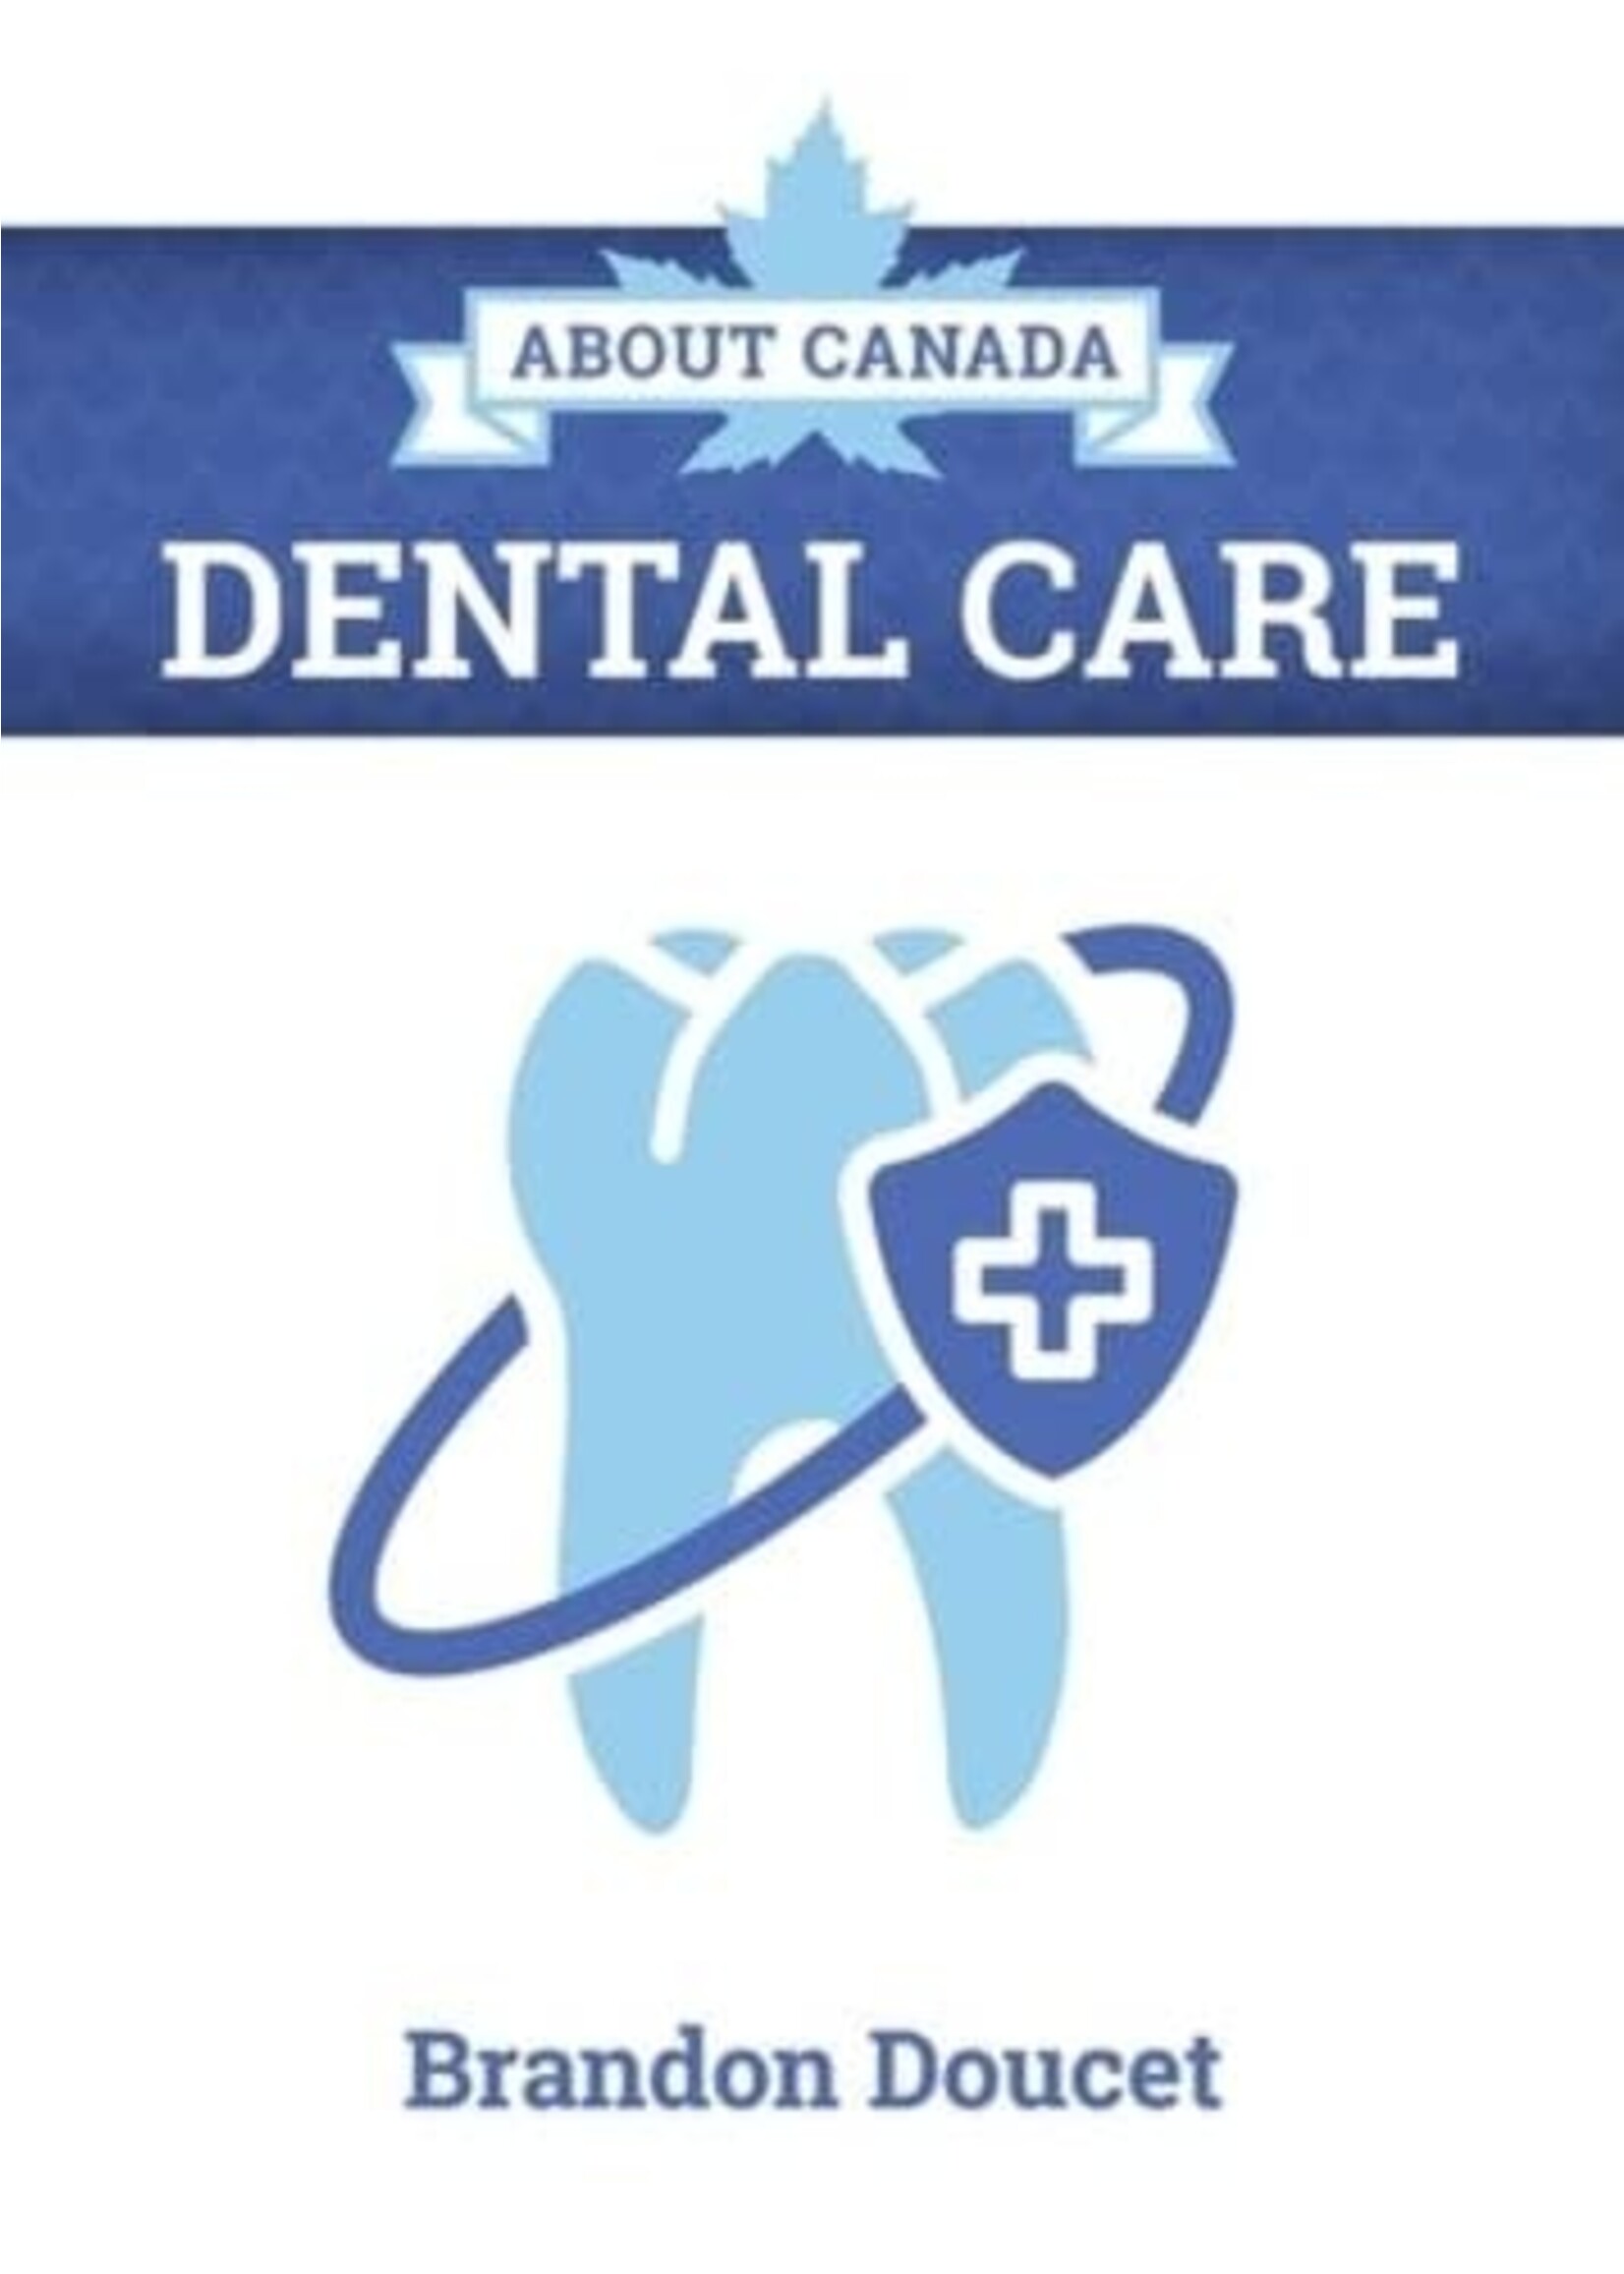 About Canada: Dental Care (About Canada #14) by Brandon Doucet